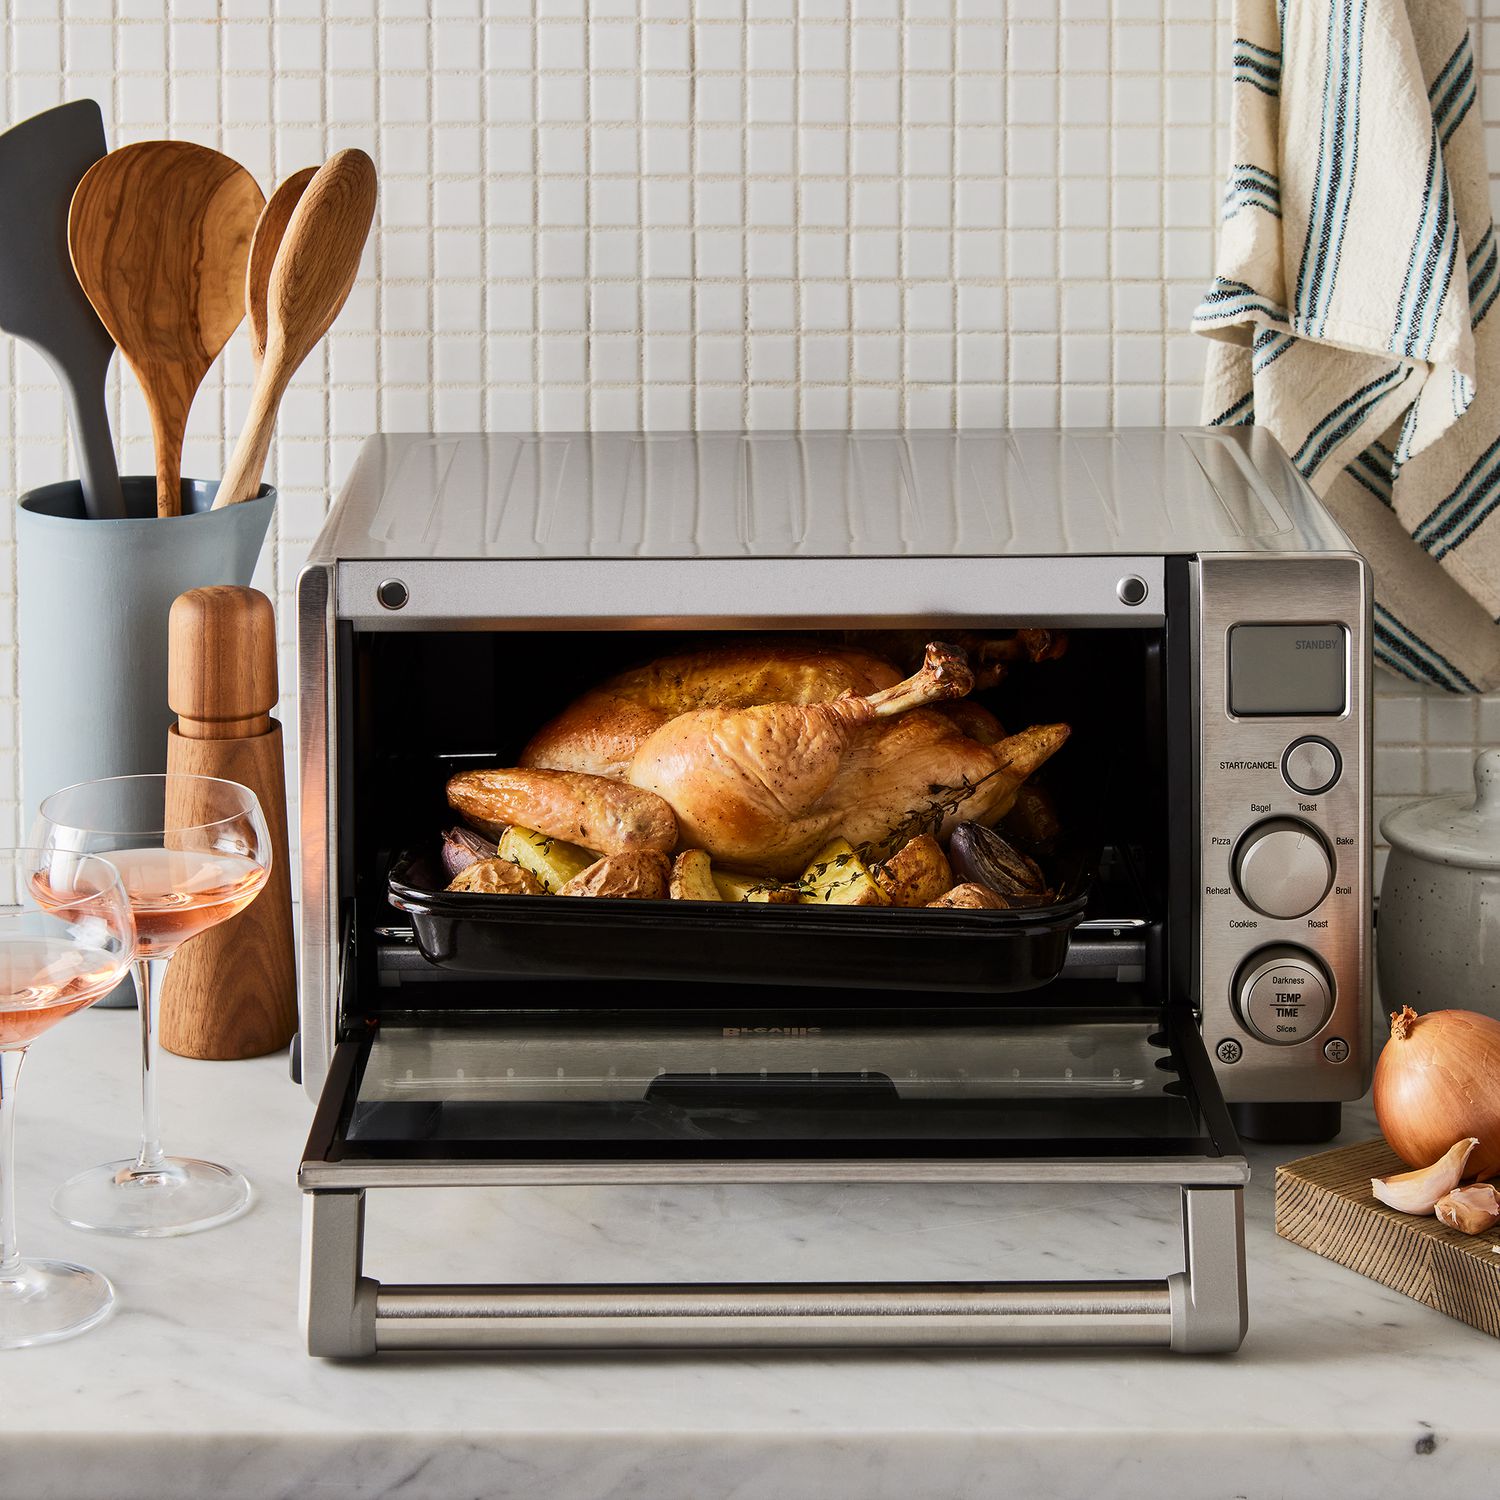 Breville the Smart Oven Air Fryer Toaster Oven Review: top toasting